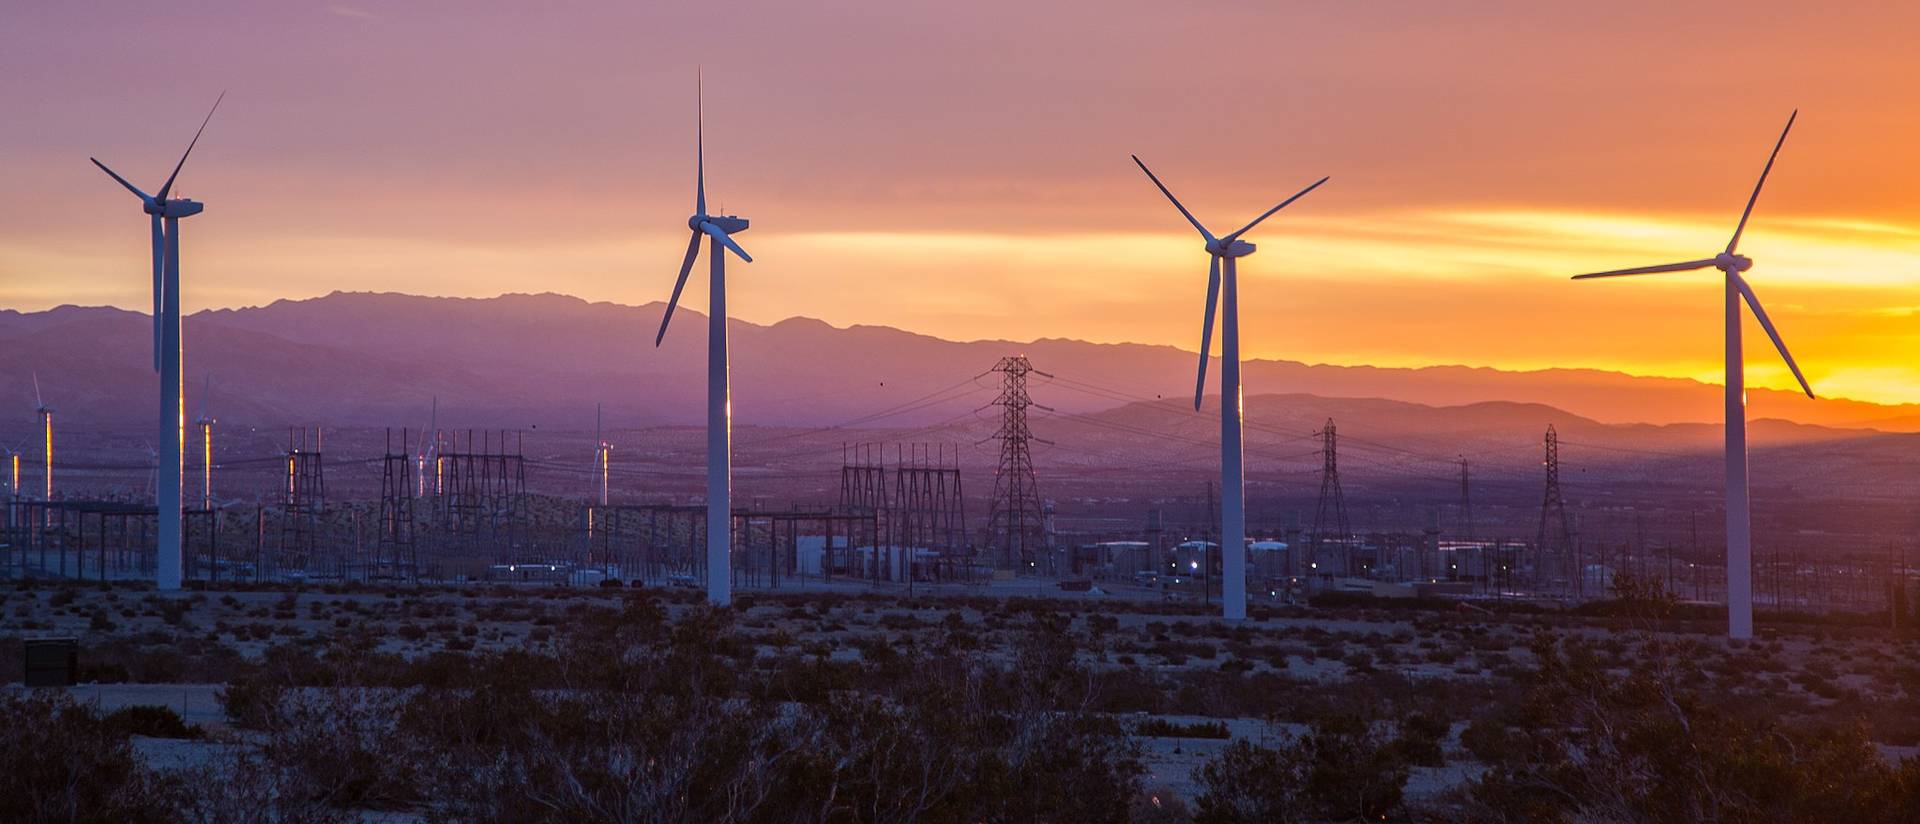 Dillon Wind Power Project in Palm Springs, Riverside County, California (Photo credit: Tony Webster)